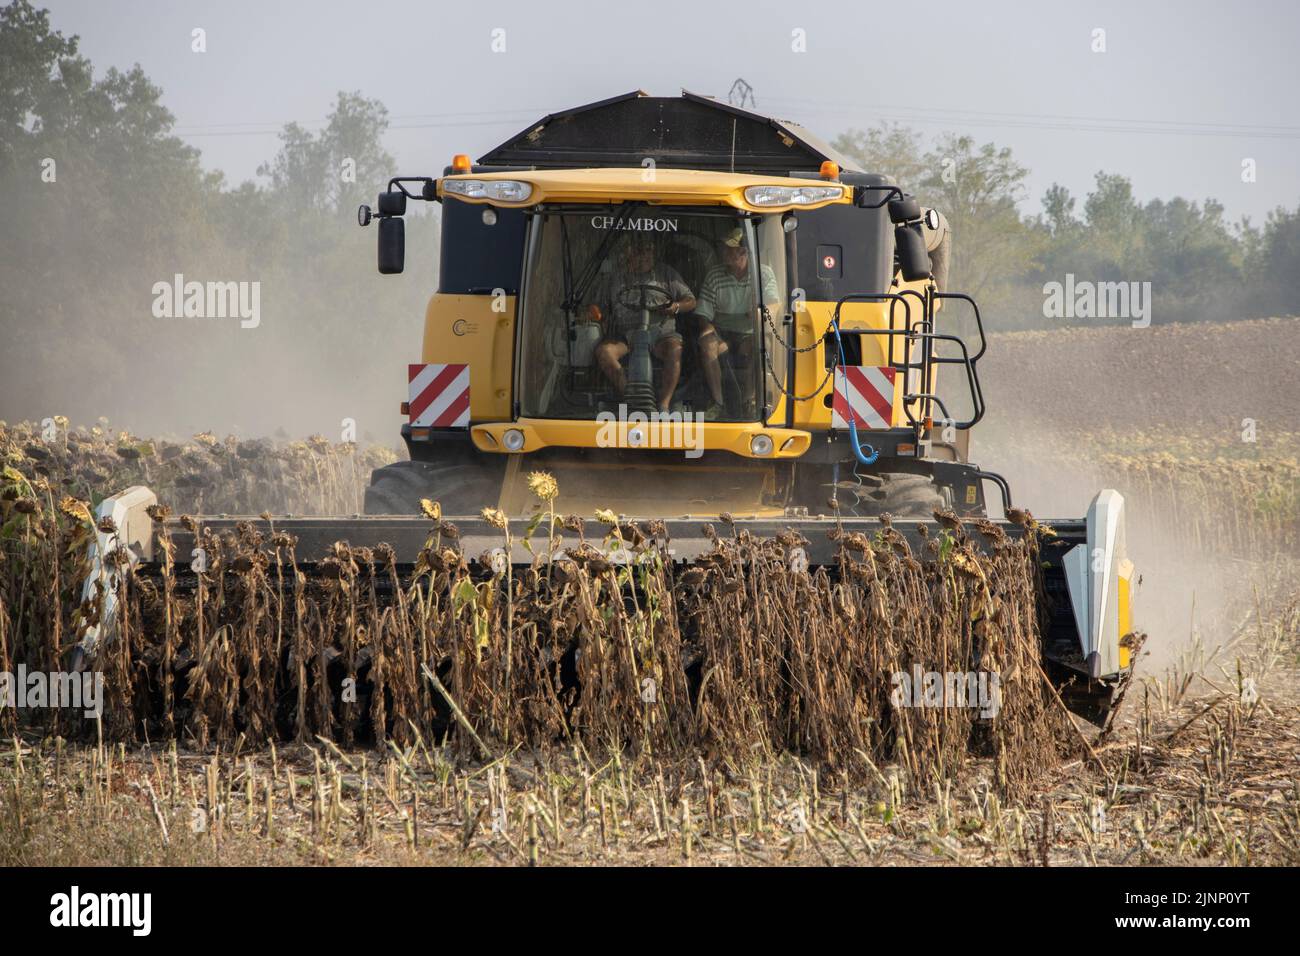 French farmers cultivating sunflower plants in the Dordogne region using a New Holland combine harverster CX0870 Stock Photo